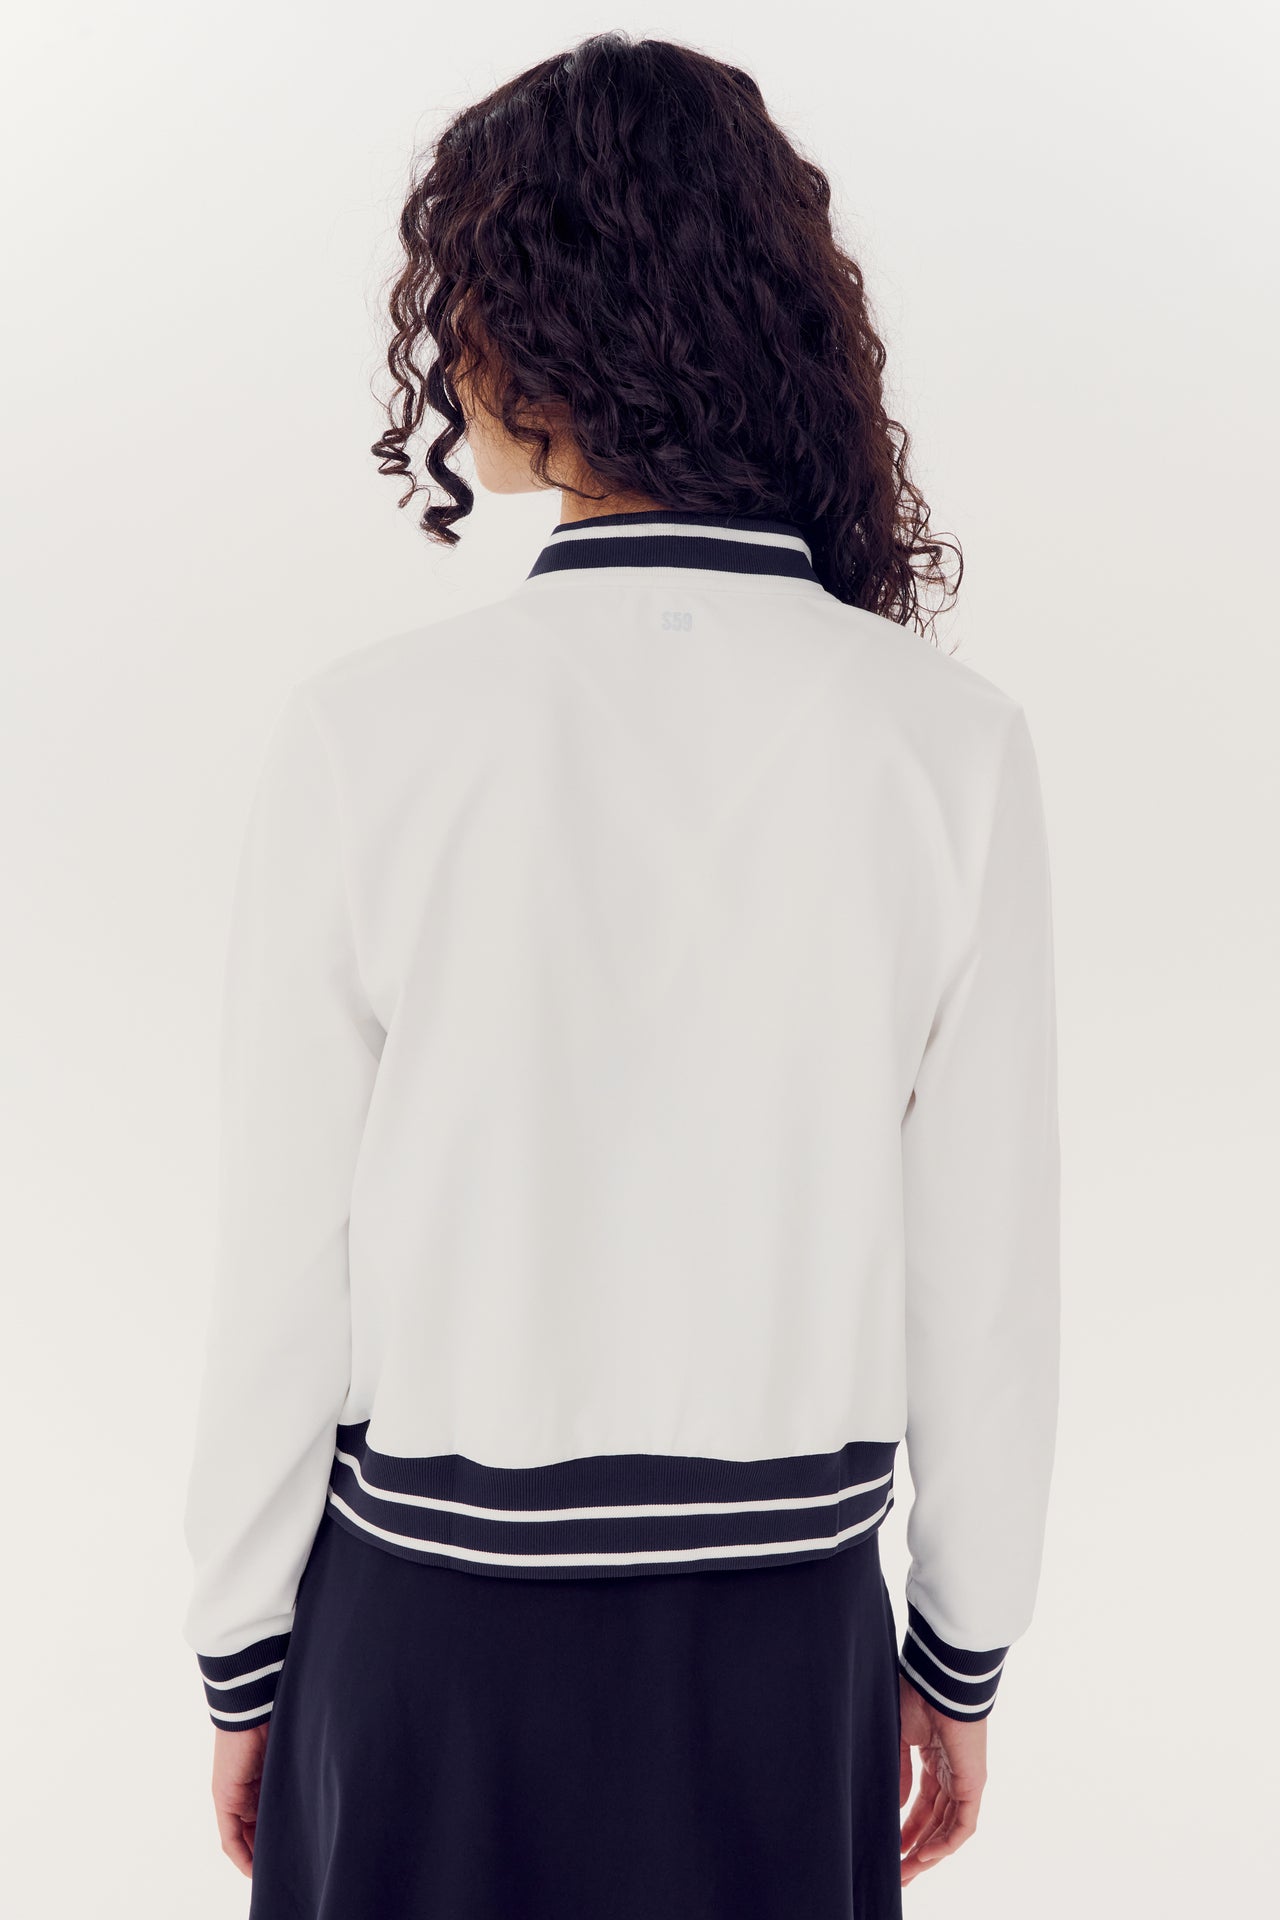 Woman viewed from behind, wearing a white SPLITS59 Ever Supplex Jacket with black and white striped cuffs and collar.